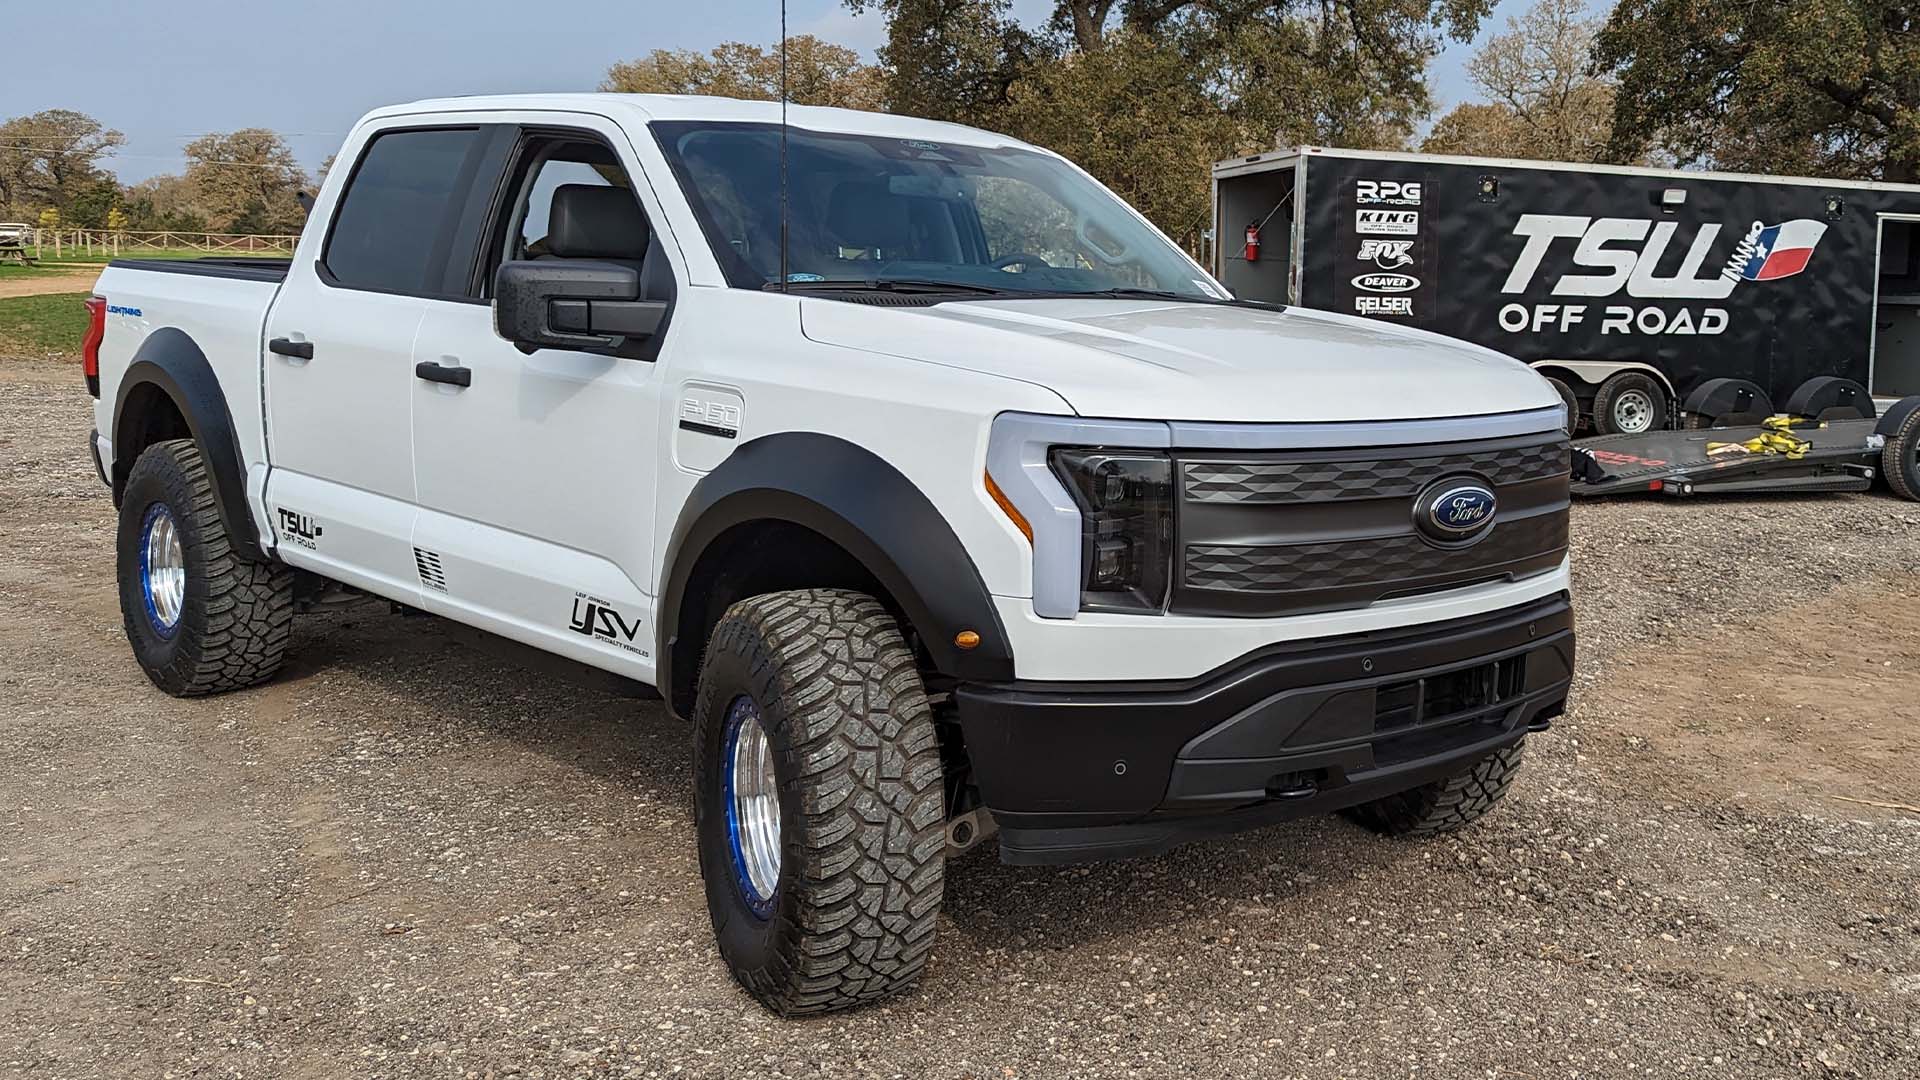 This Ford F-150 Lightning With Raptor Suspension Is a Big Deal for Electric Trucks